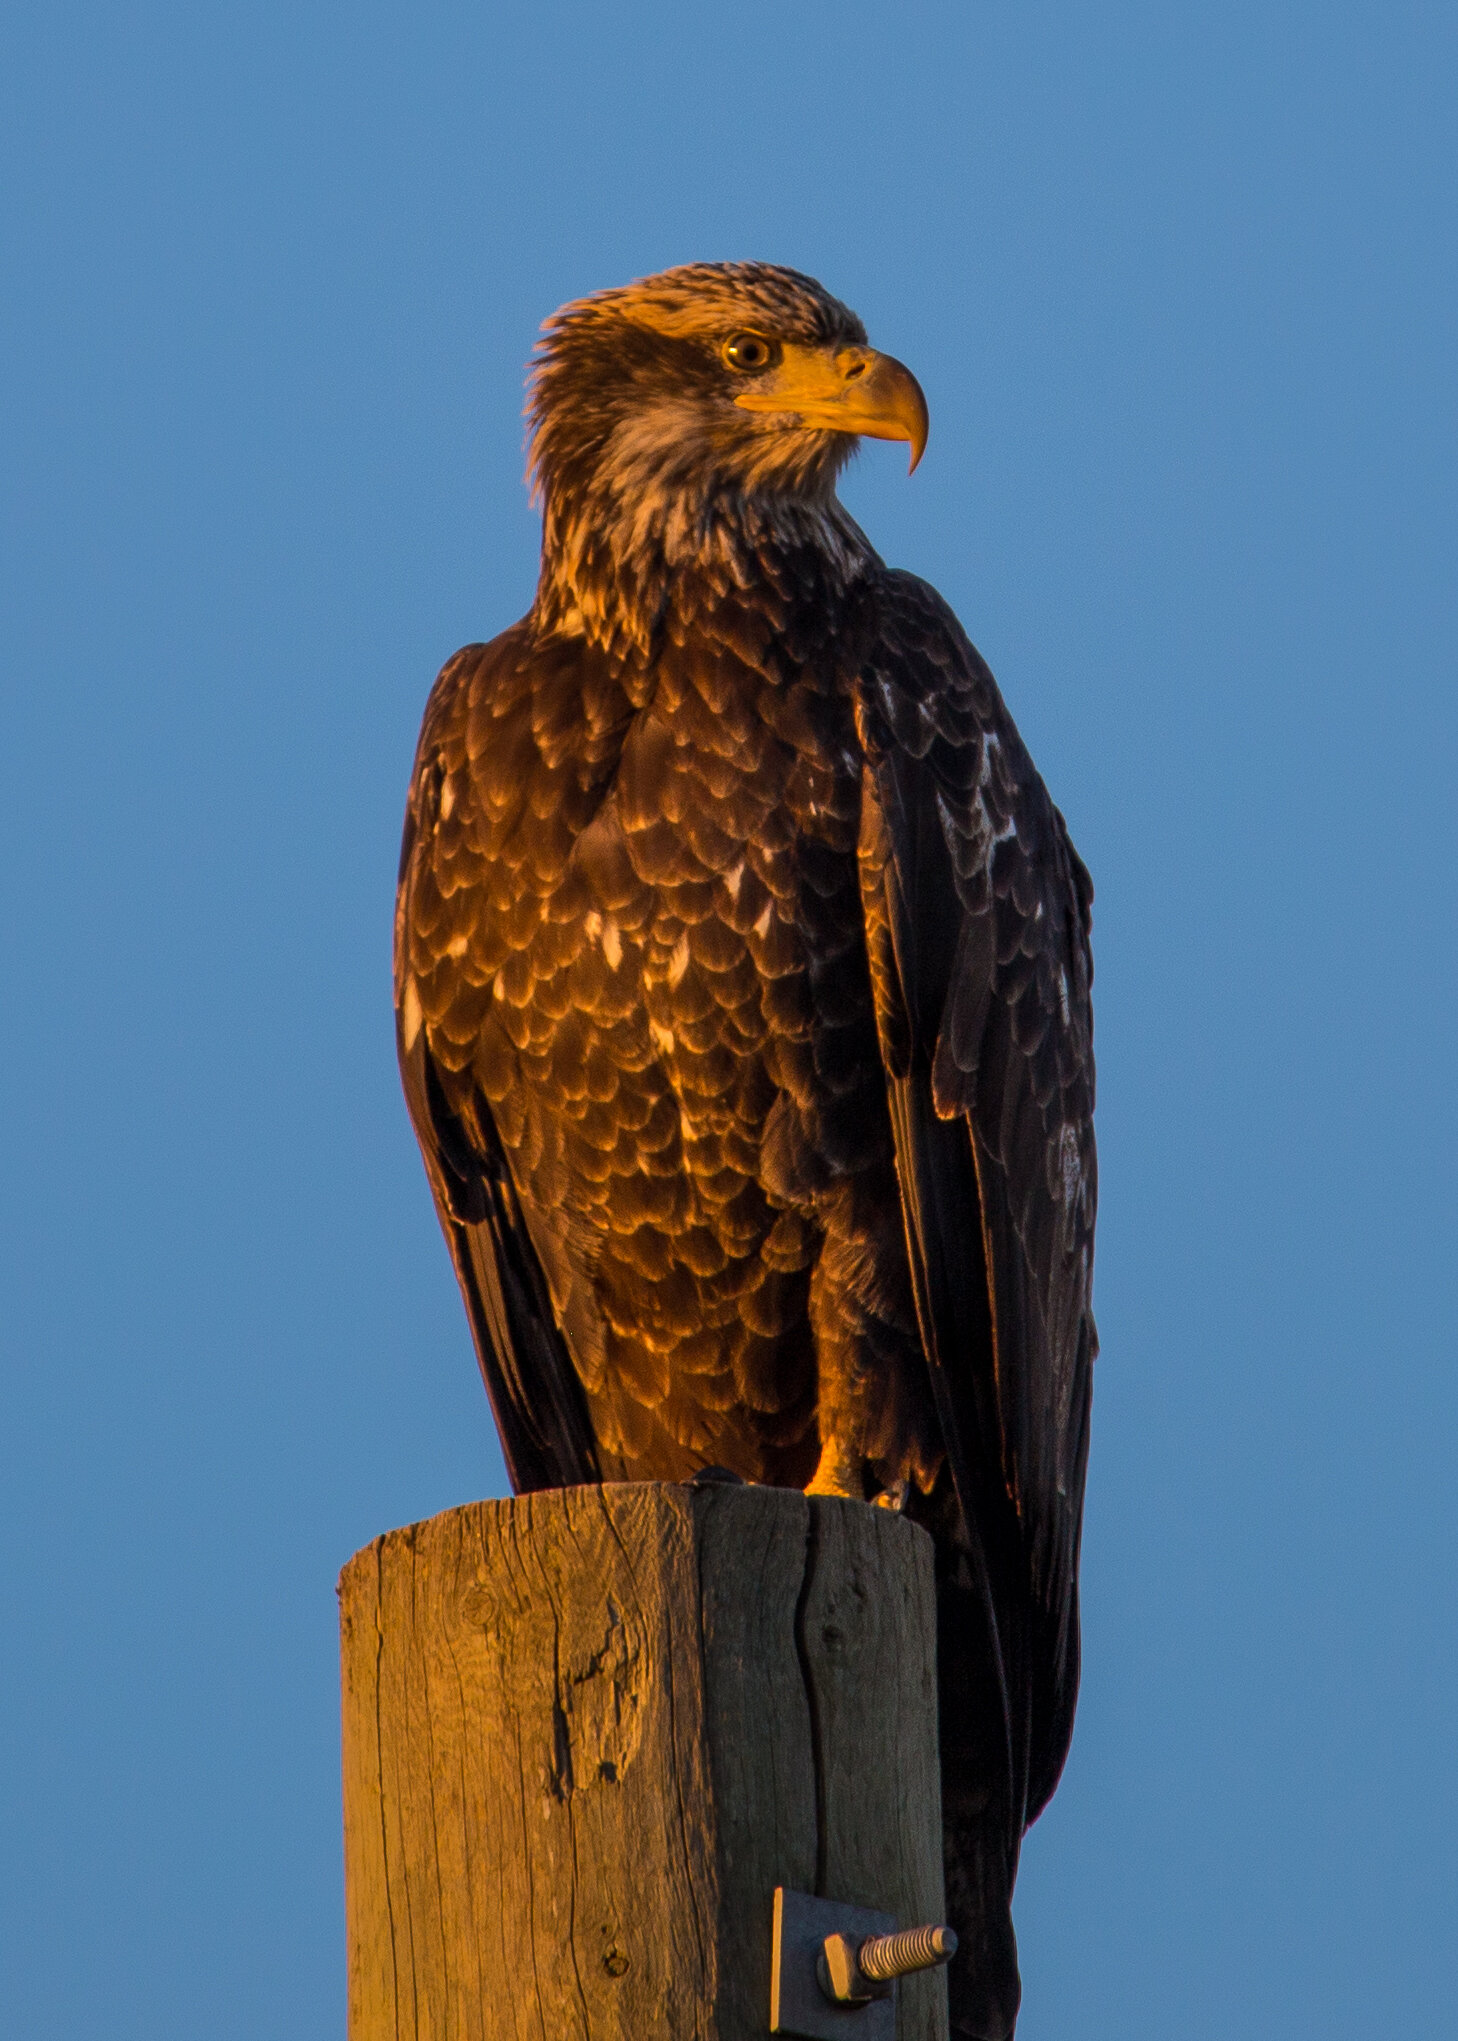  And of course, lots of bald eagles around, including this juvenile. 